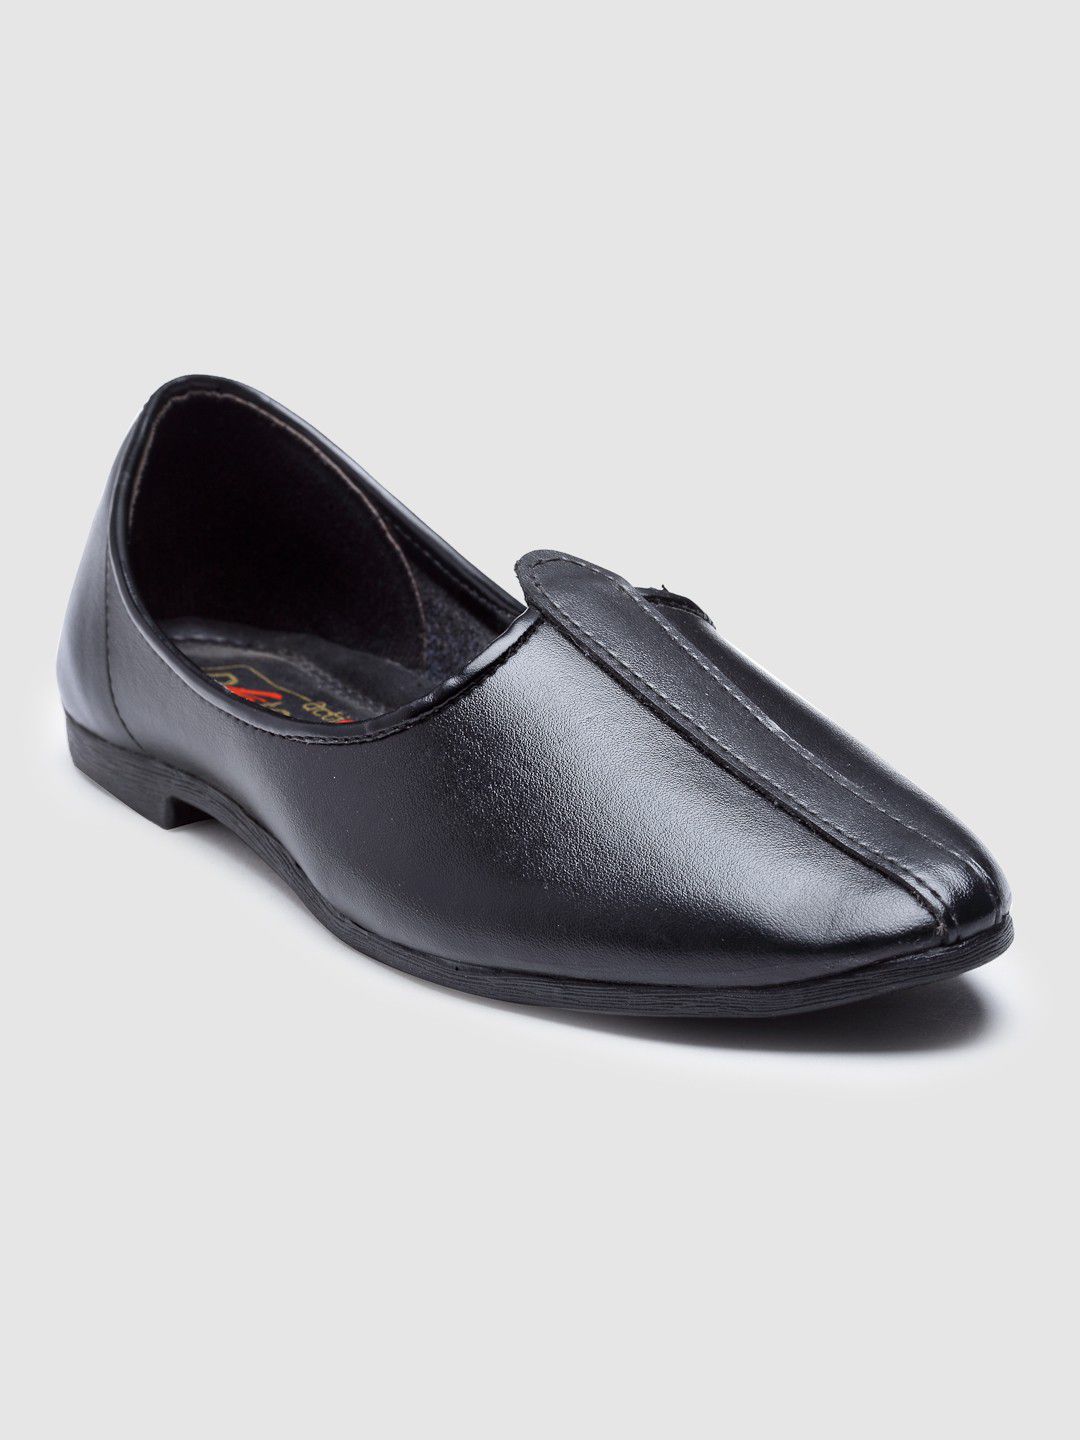     			Action Lightweight Casual Shoes - Black Men's Slip-on Shoes